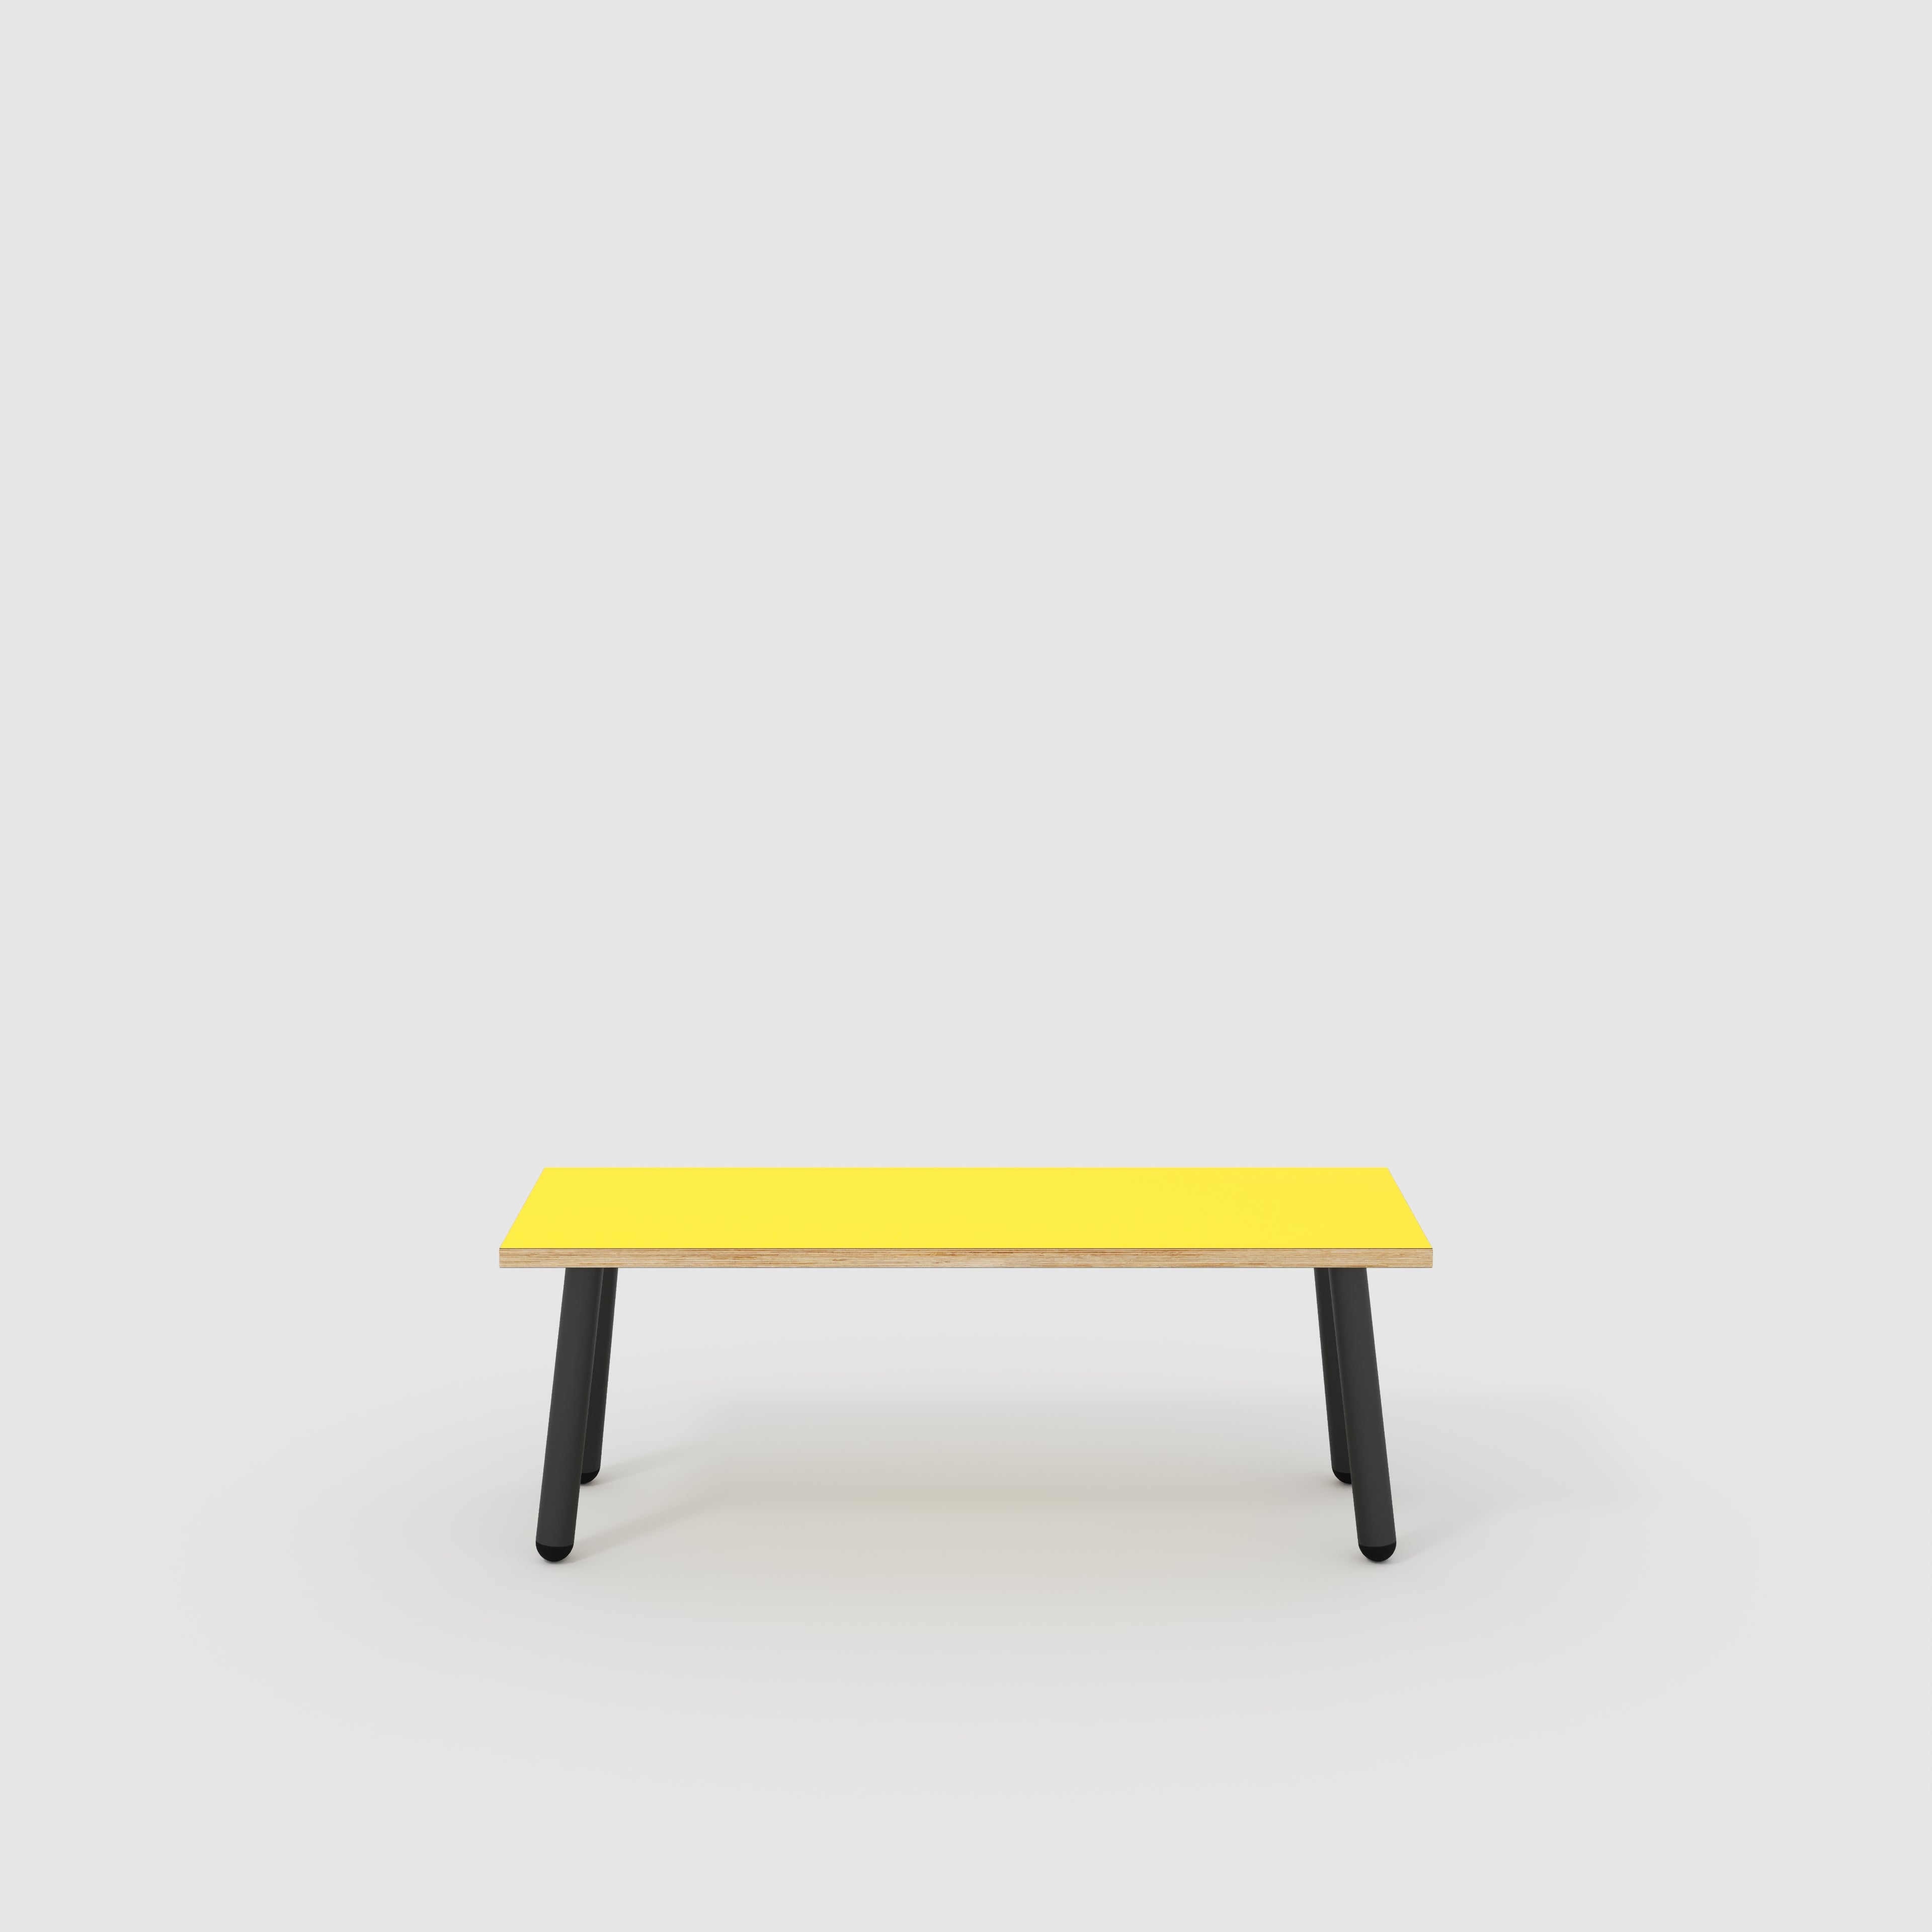 Bench Seat with Black Round Single Pin Legs - Formica Chrome Yellow - 1200(w) x 400(d)